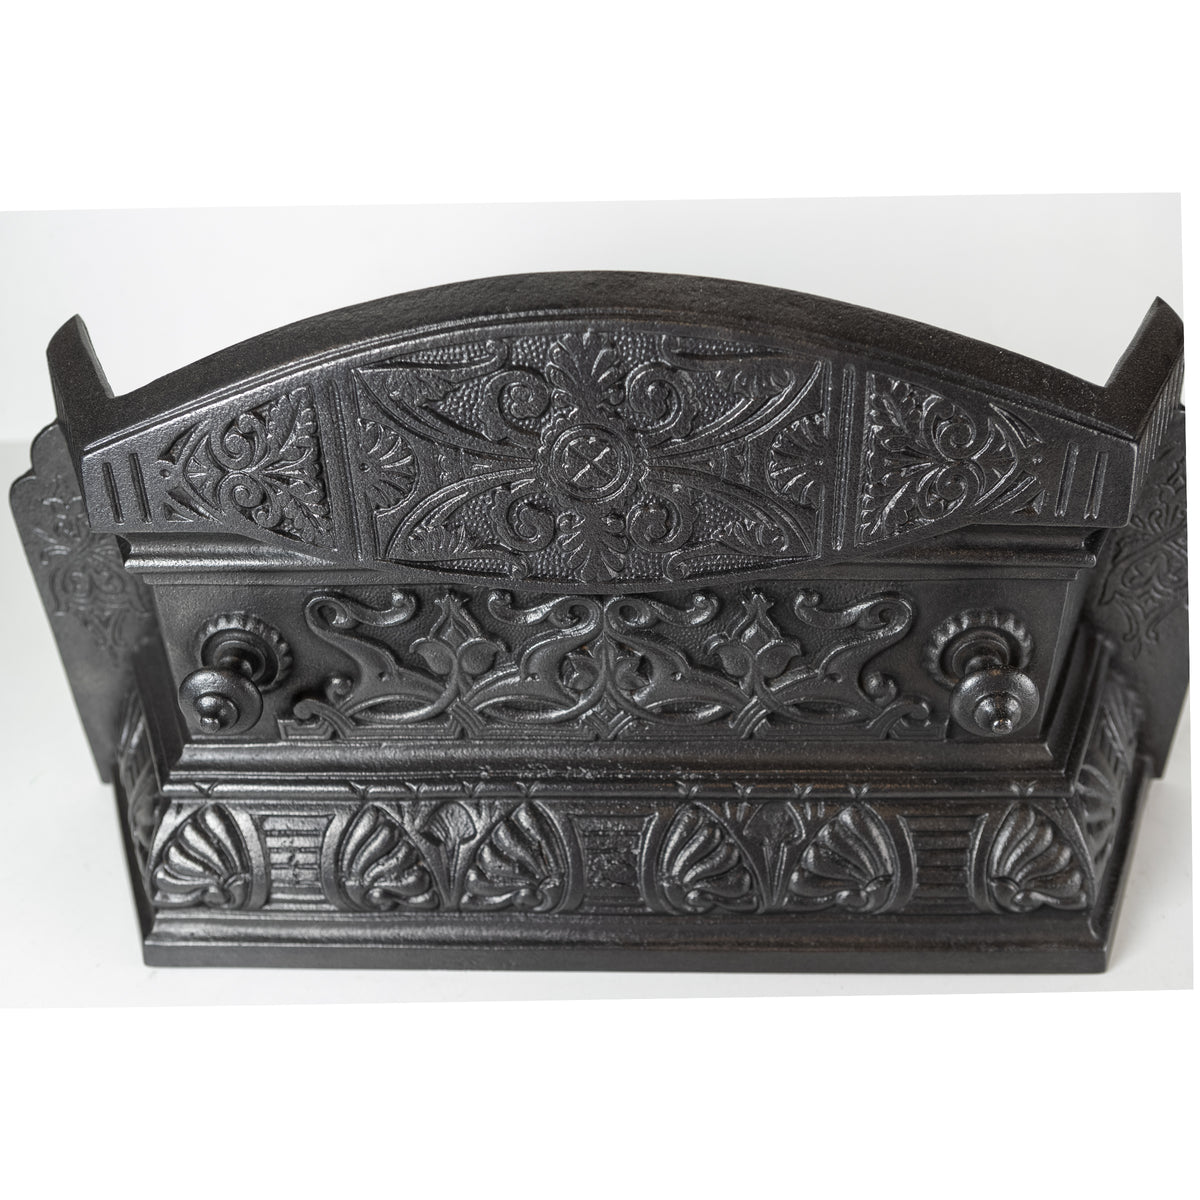 Antique Cast Iron Ornate Floral Fireplace Tidy | Betty | Ashpan Cover | The Architectural Forum